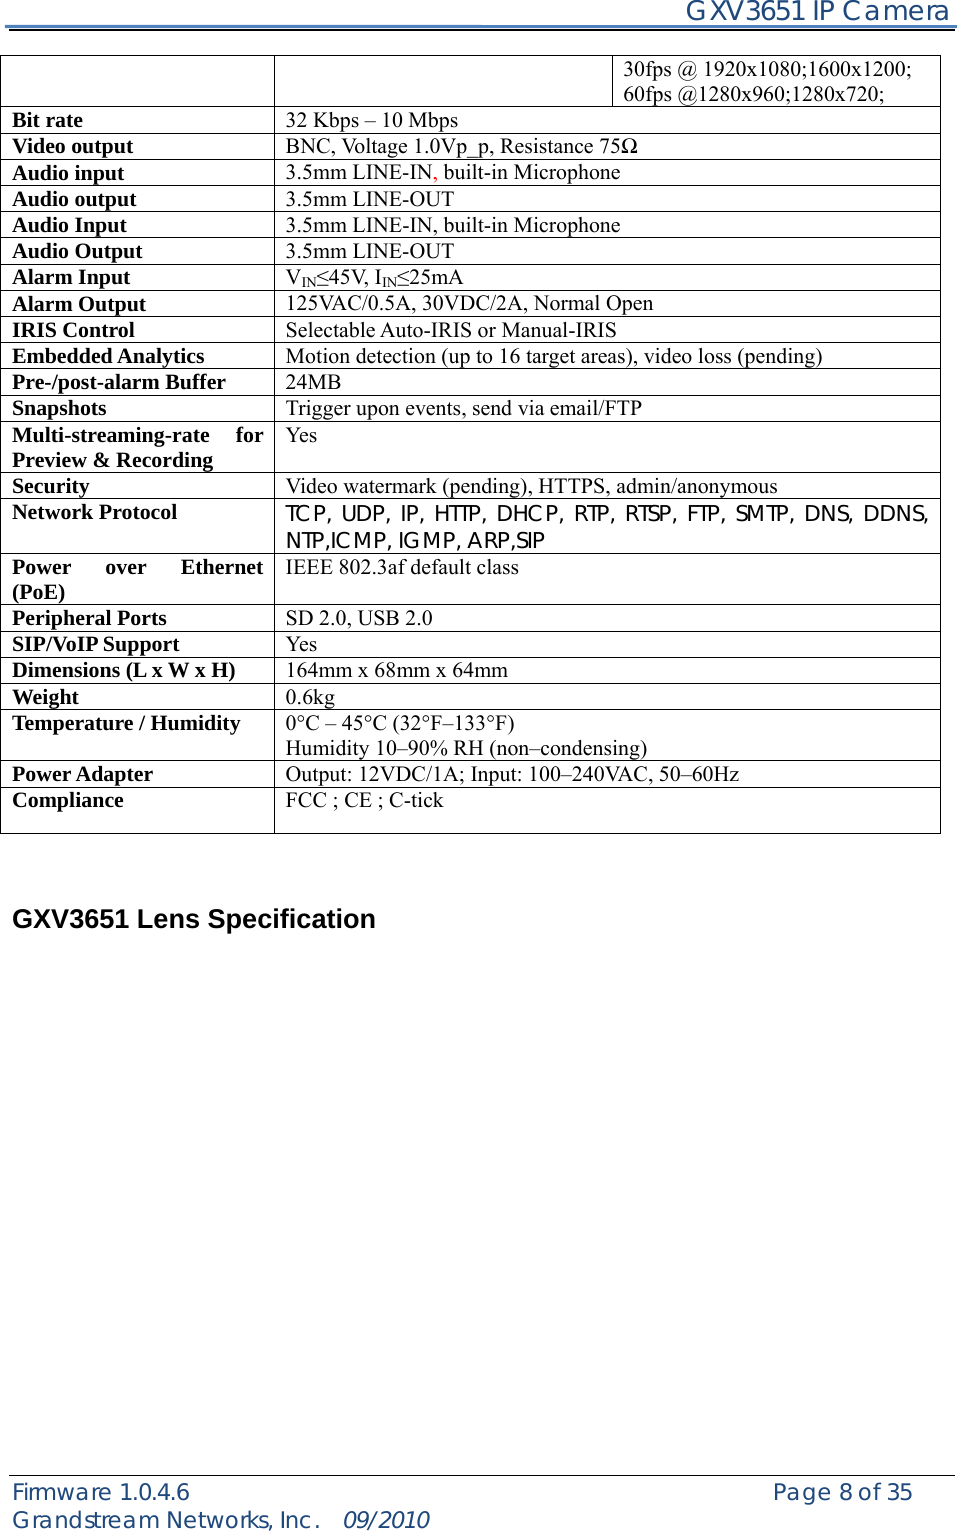     GXV3651 IP Camera Firmware 1.0.4.6                                                   Page 8 of 35    Grandstream Networks, Inc.  09/2010  30fps @ 1920x1080;1600x1200; 60fps @1280x960;1280x720; Bit rate  32 Kbps – 10 Mbps Video output  BNC, Voltage 1.0Vp_p, Resistance 75Ω Audio input  3.5mm LINE-IN, built-in Microphone Audio output  3.5mm LINE-OUT Audio Input  3.5mm LINE-IN, built-in Microphone Audio Output  3.5mm LINE-OUT Alarm Input  VIN≤45V, IIN≤25mA Alarm Output  125VAC/0.5A, 30VDC/2A, Normal Open IRIS Control  Selectable Auto-IRIS or Manual-IRIS Embedded Analytics  Motion detection (up to 16 target areas), video loss (pending) Pre-/post-alarm Buffer  24MB Snapshots  Trigger upon events, send via email/FTP Multi-streaming-rate for Preview &amp; Recording  Yes Security  Video watermark (pending), HTTPS, admin/anonymous Network Protocol  TCP, UDP, IP, HTTP, DHCP, RTP, RTSP, FTP, SMTP, DNS, DDNS, NTP,ICMP, IGMP, ARP,SIP Power over Ethernet (PoE)  IEEE 802.3af default class Peripheral Ports  SD 2.0, USB 2.0 SIP/VoIP Support  Yes Dimensions (L x W x H)  164mm x 68mm x 64mm Weight  0.6kg Temperature / Humidity  0°C – 45°C (32°F–133°F) Humidity 10–90% RH (non–condensing) Power Adapter  Output: 12VDC/1A; Input: 100–240VAC, 50–60Hz Compliance  FCC ; CE ; C-tick   GXV3651 Lens Specification 